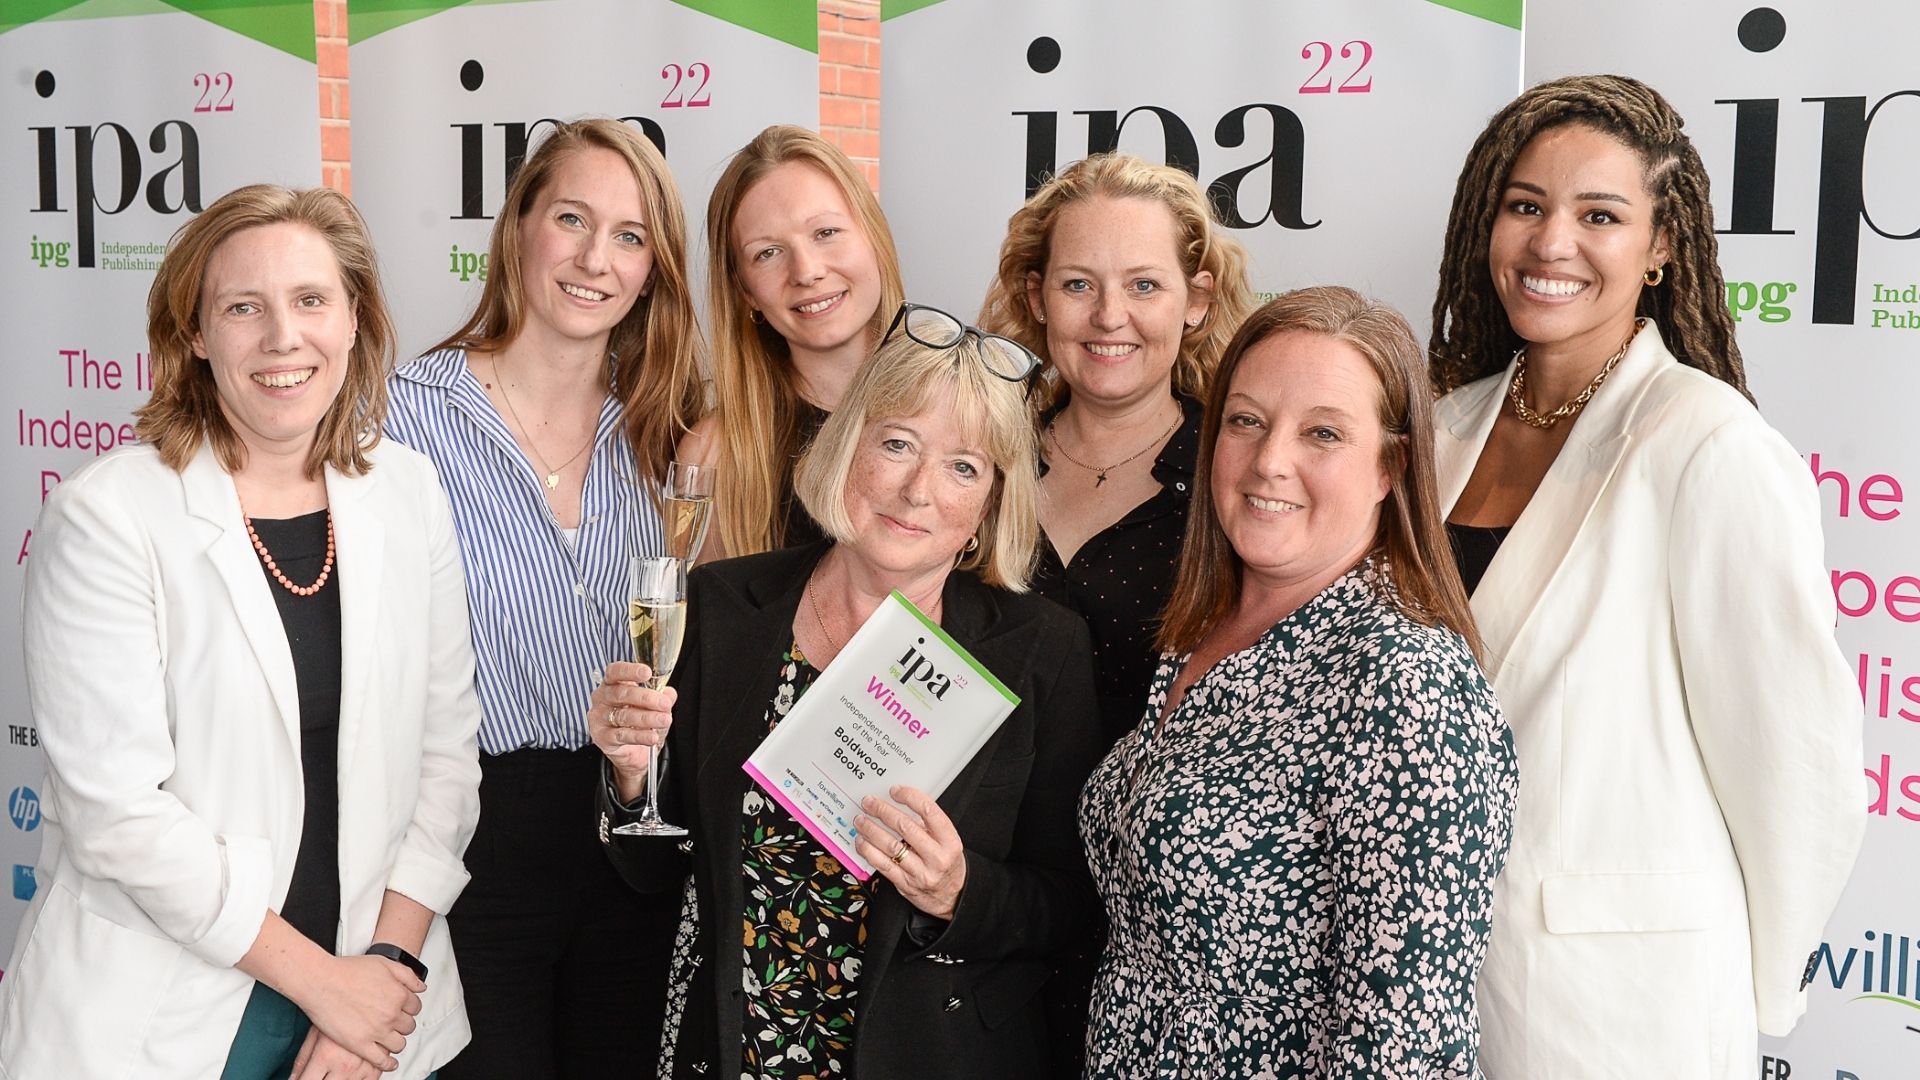 The Boldwood Books team at the 2022 IPG awards